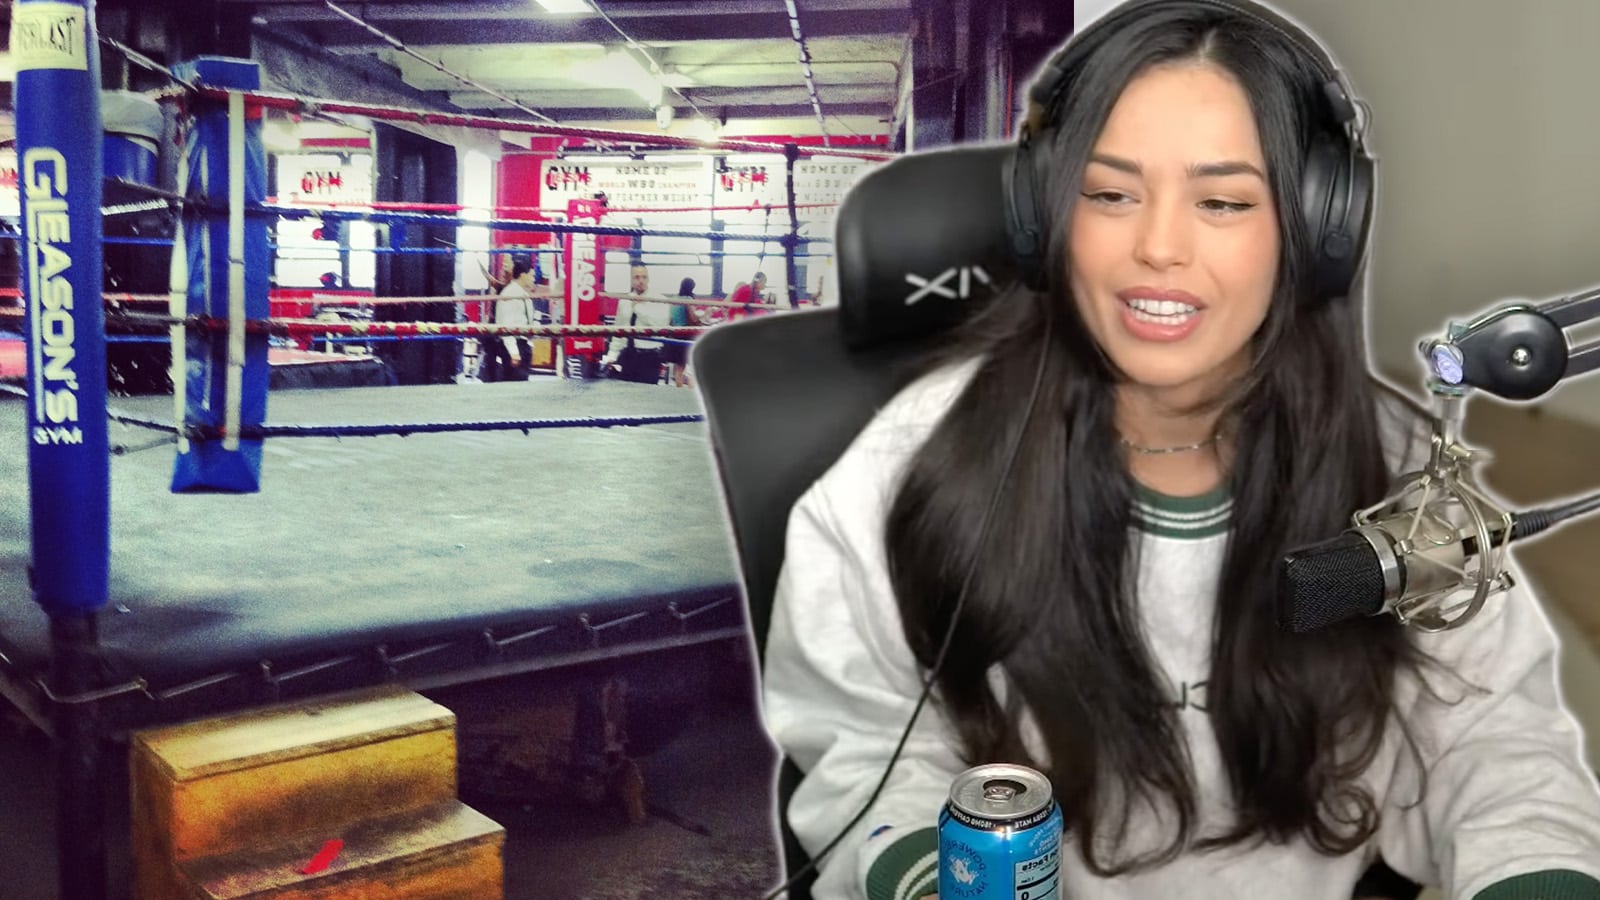 Yodeling Haley is down to fight Valkyrae after historic Creator Clash boxing  match - Dexerto